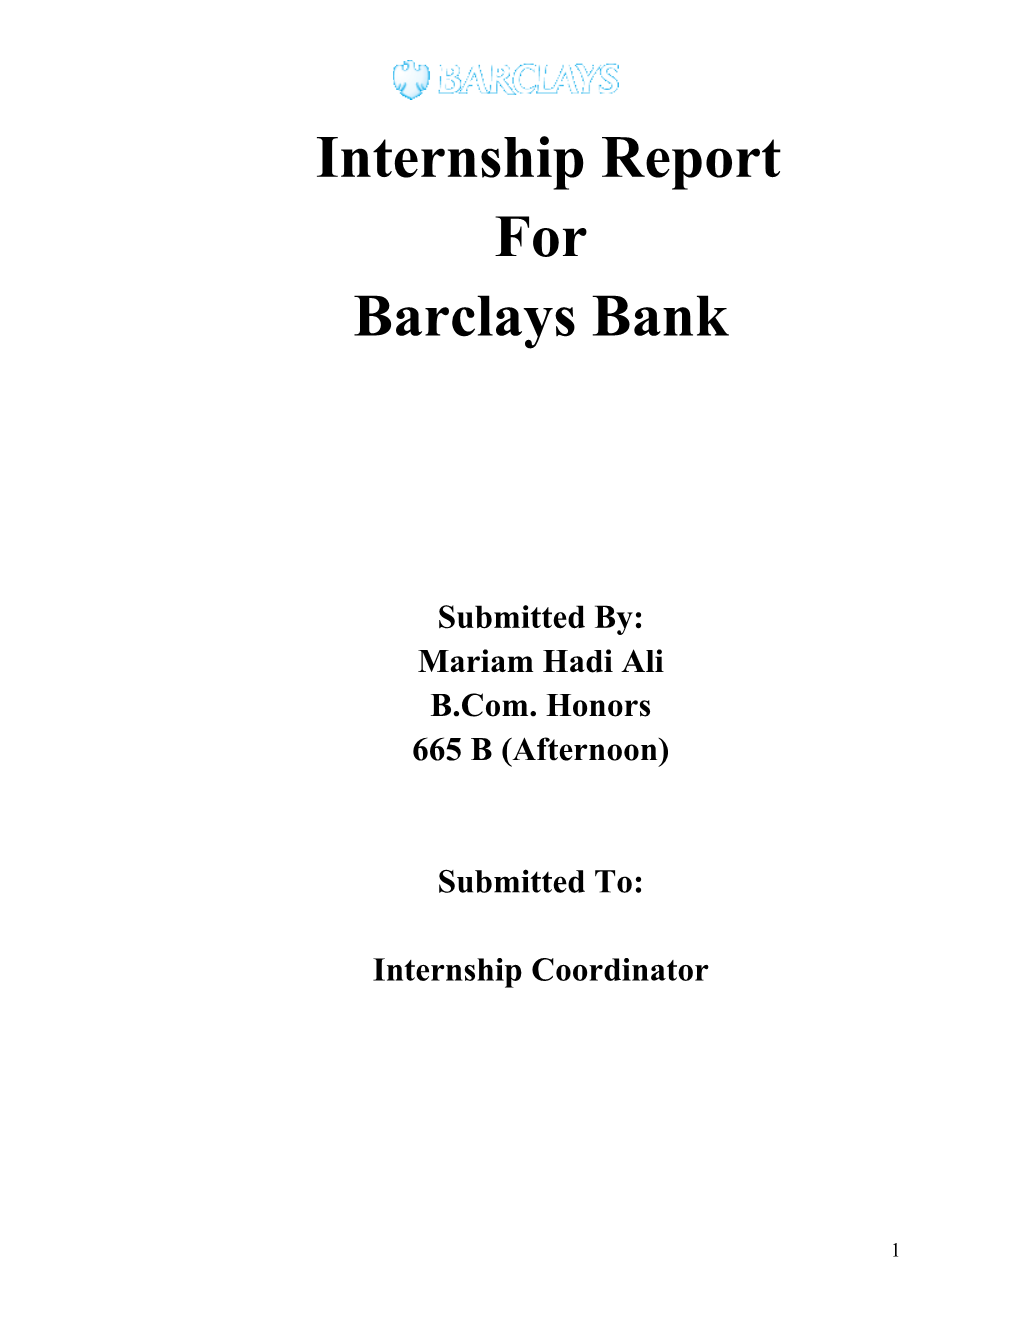 Internship Report for Barclays Bank Submitted By